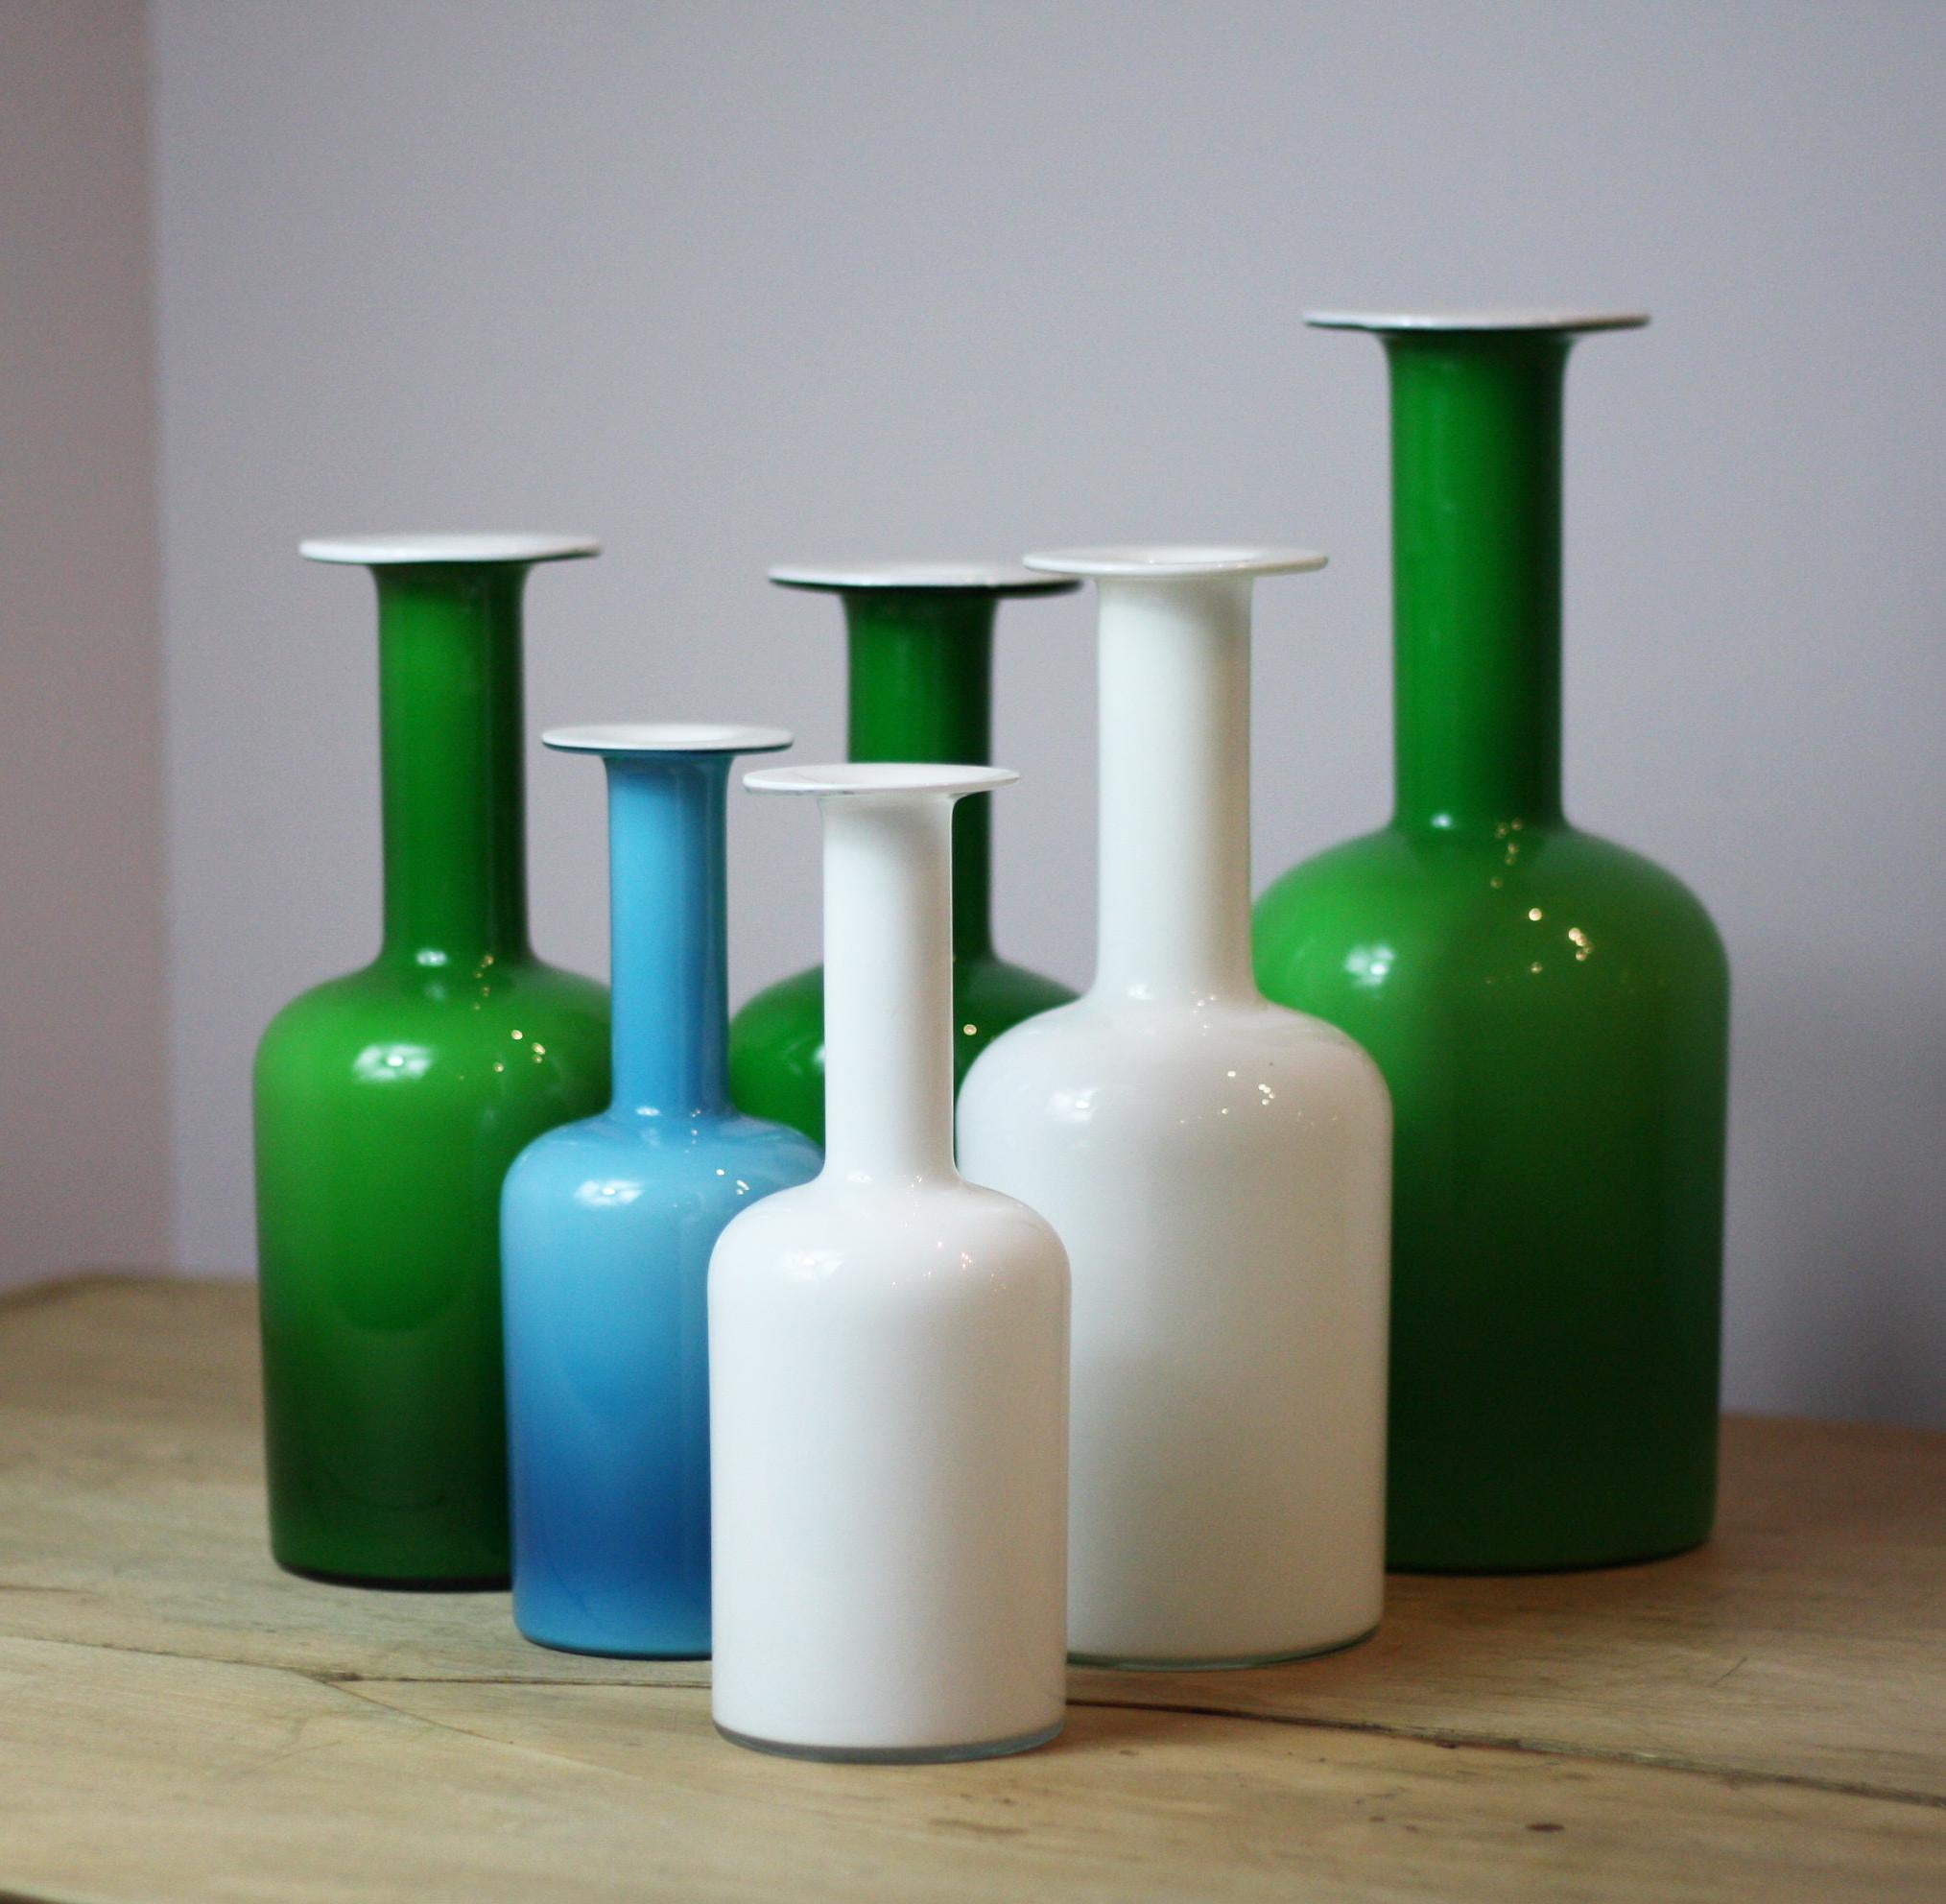 Collection of 6 Carnaby Gulvase Holmgaard vases 3 green 1 white 2 blue various sizes 2 with original stickers Danish, 1960s. Measurements are for the tallest.